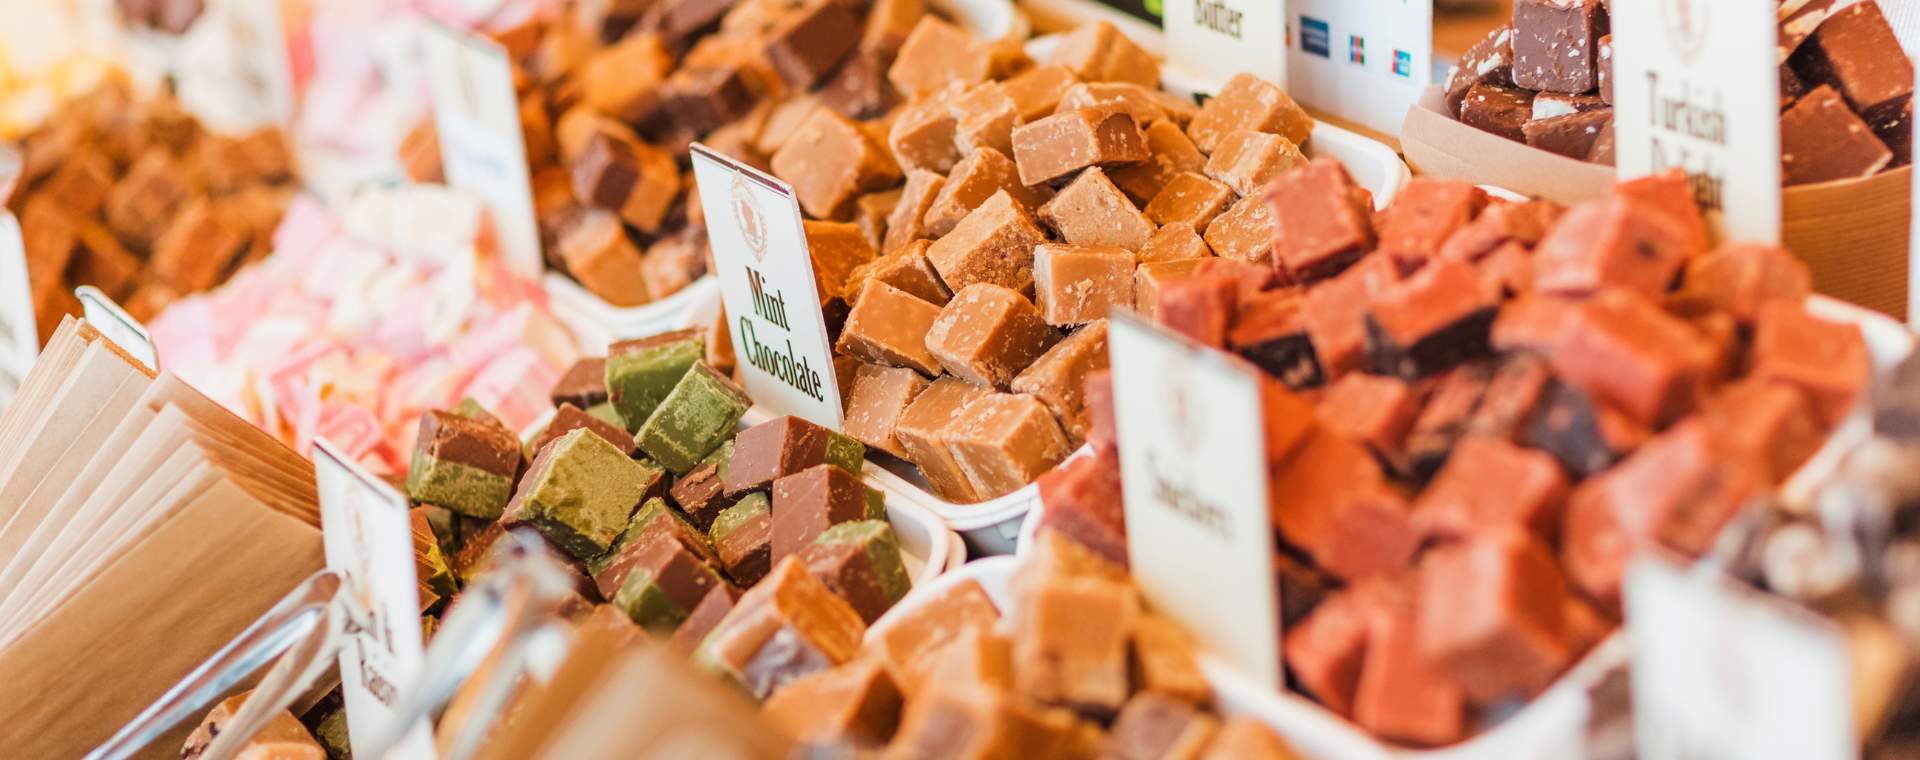 A market stall in East Yorkshire selling handmade fudge